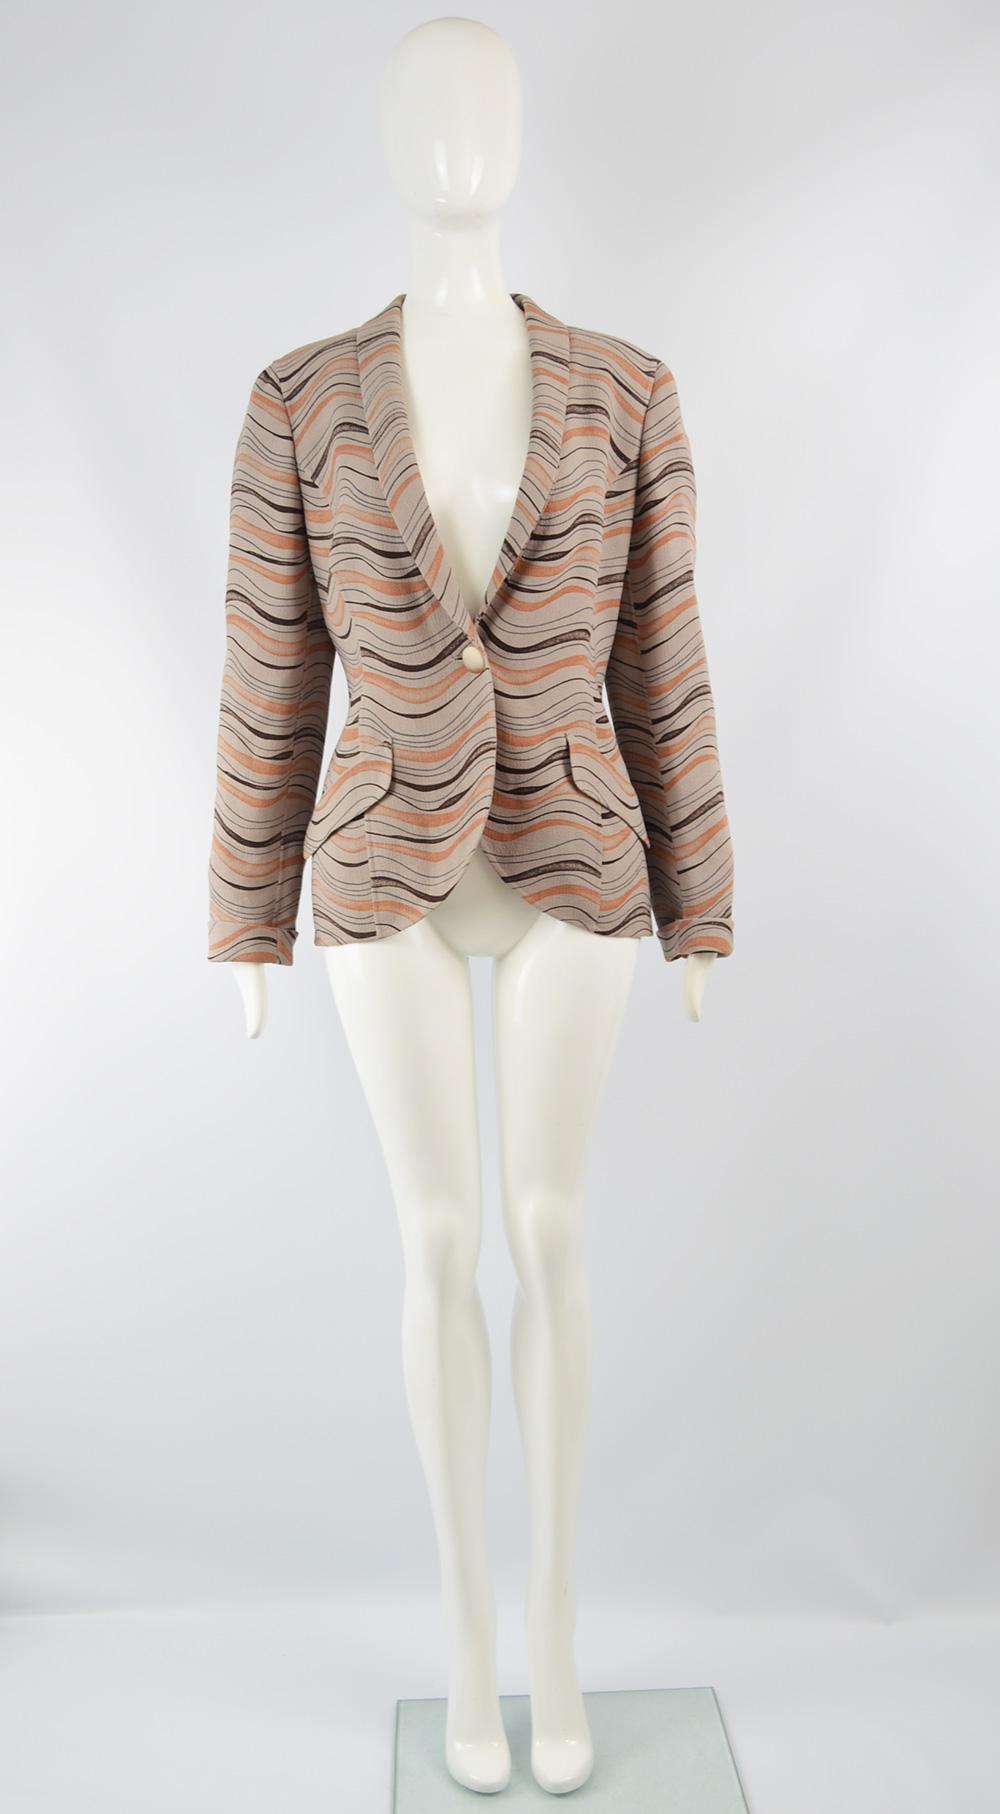 A chic vintage women's jacket from the 80s by luxury Italian fashion designer, Mila Schön. Made in Italy and beautifully tailored, it is made from a lightweight, taupe colored wool crepe with an orange and black wavy pattern. It fastens with a